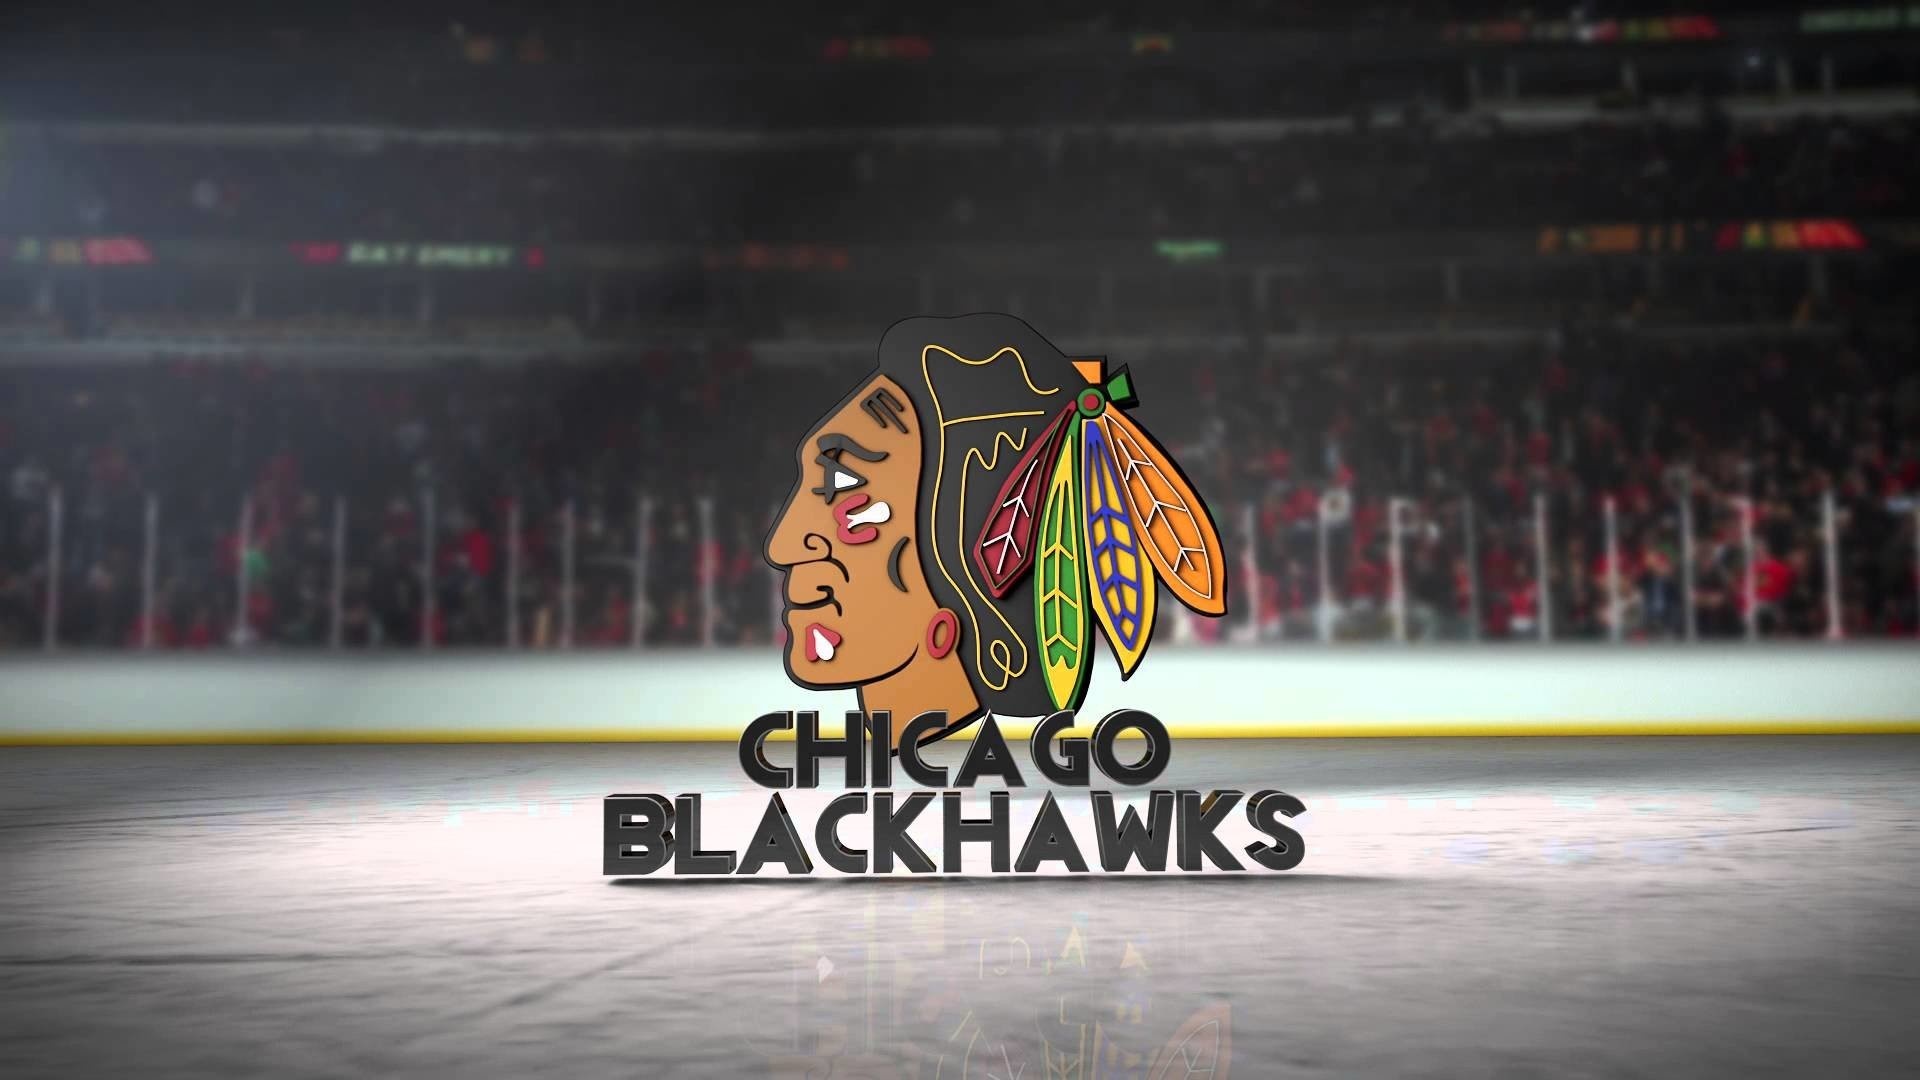 Chicago Blackhawks: One of the most recognizable and dramatic logos in all sports. 1920x1080 Full HD Wallpaper.